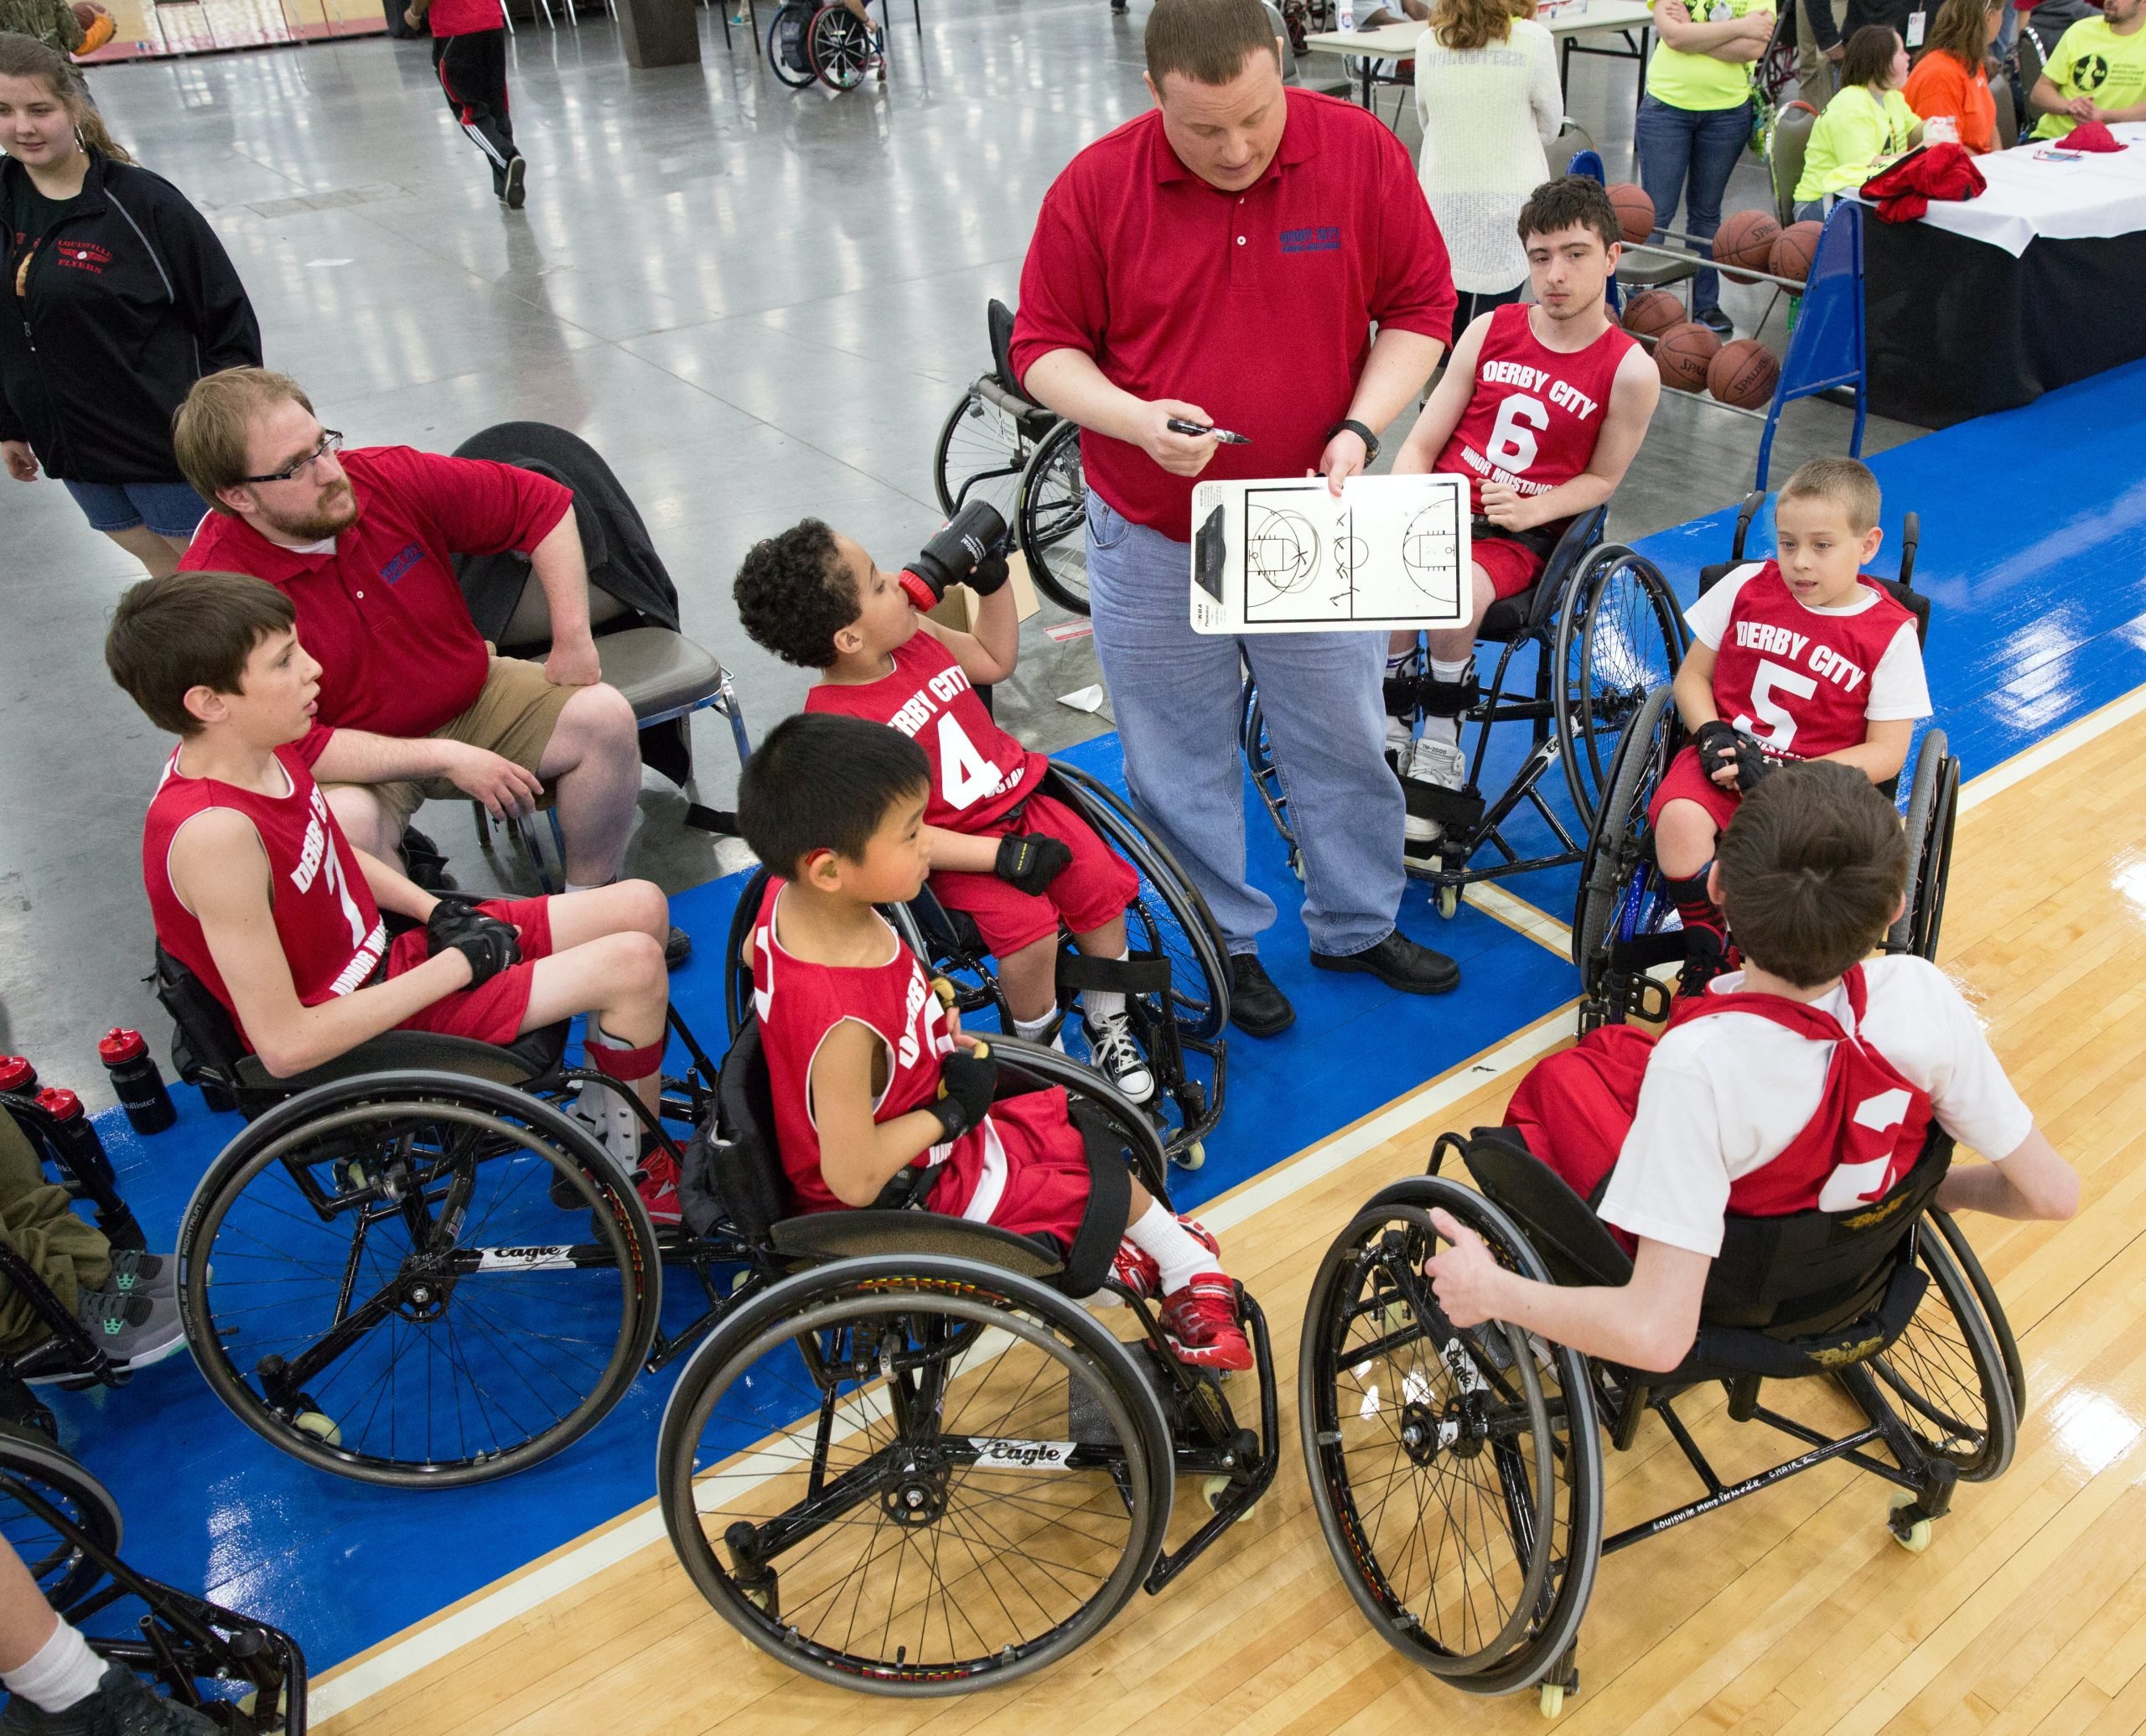 A team of young basketball players in wheelchairs.